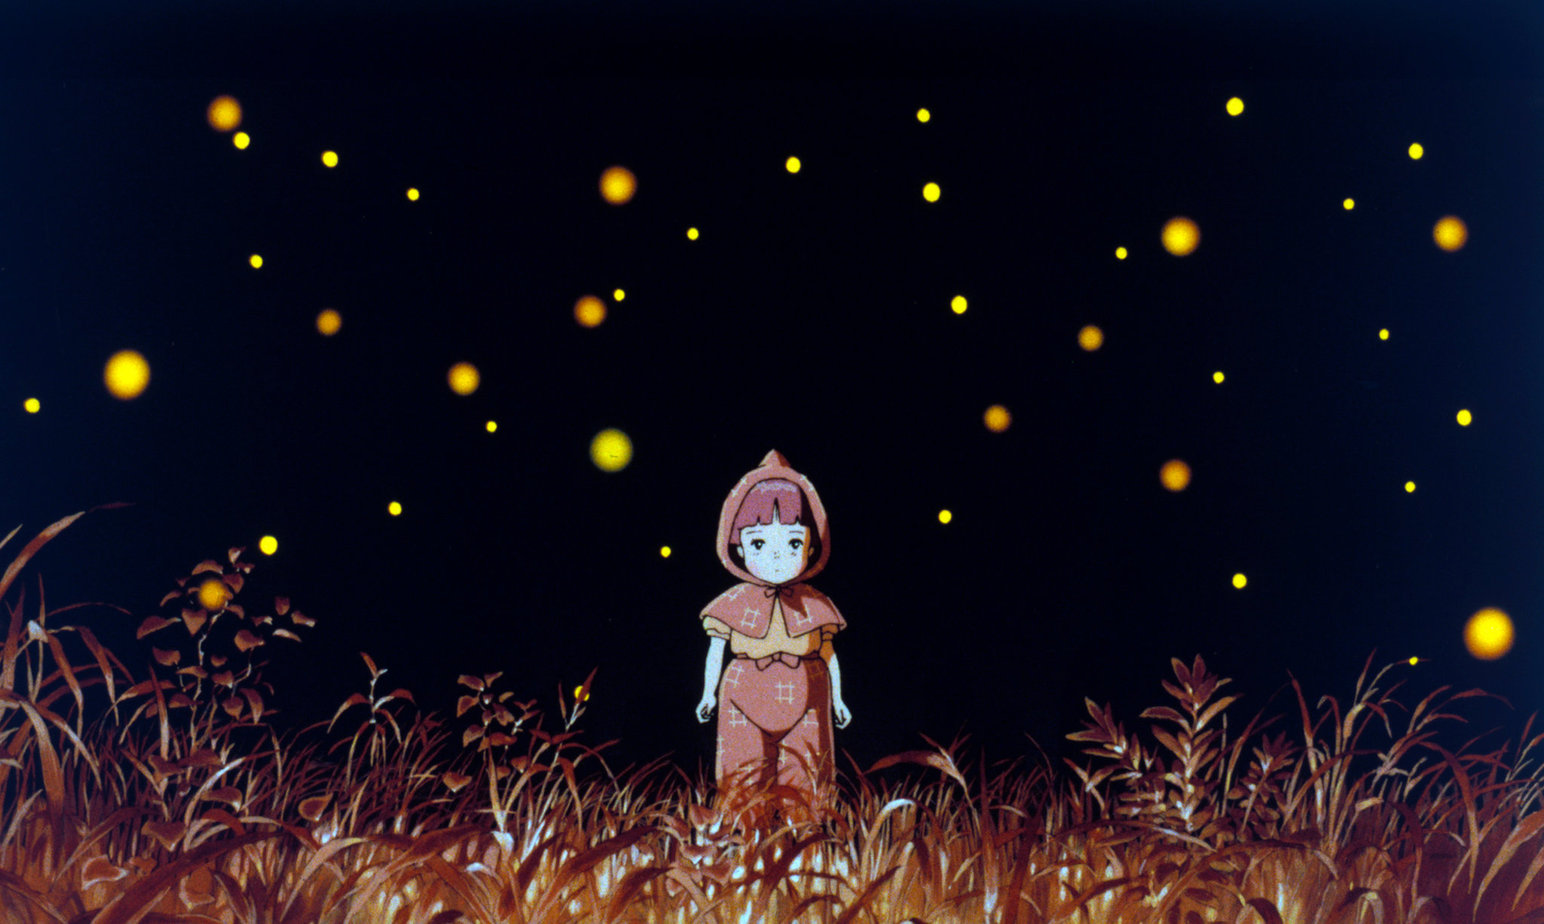 Best 80's anime movies list - Grave of the Fireflies